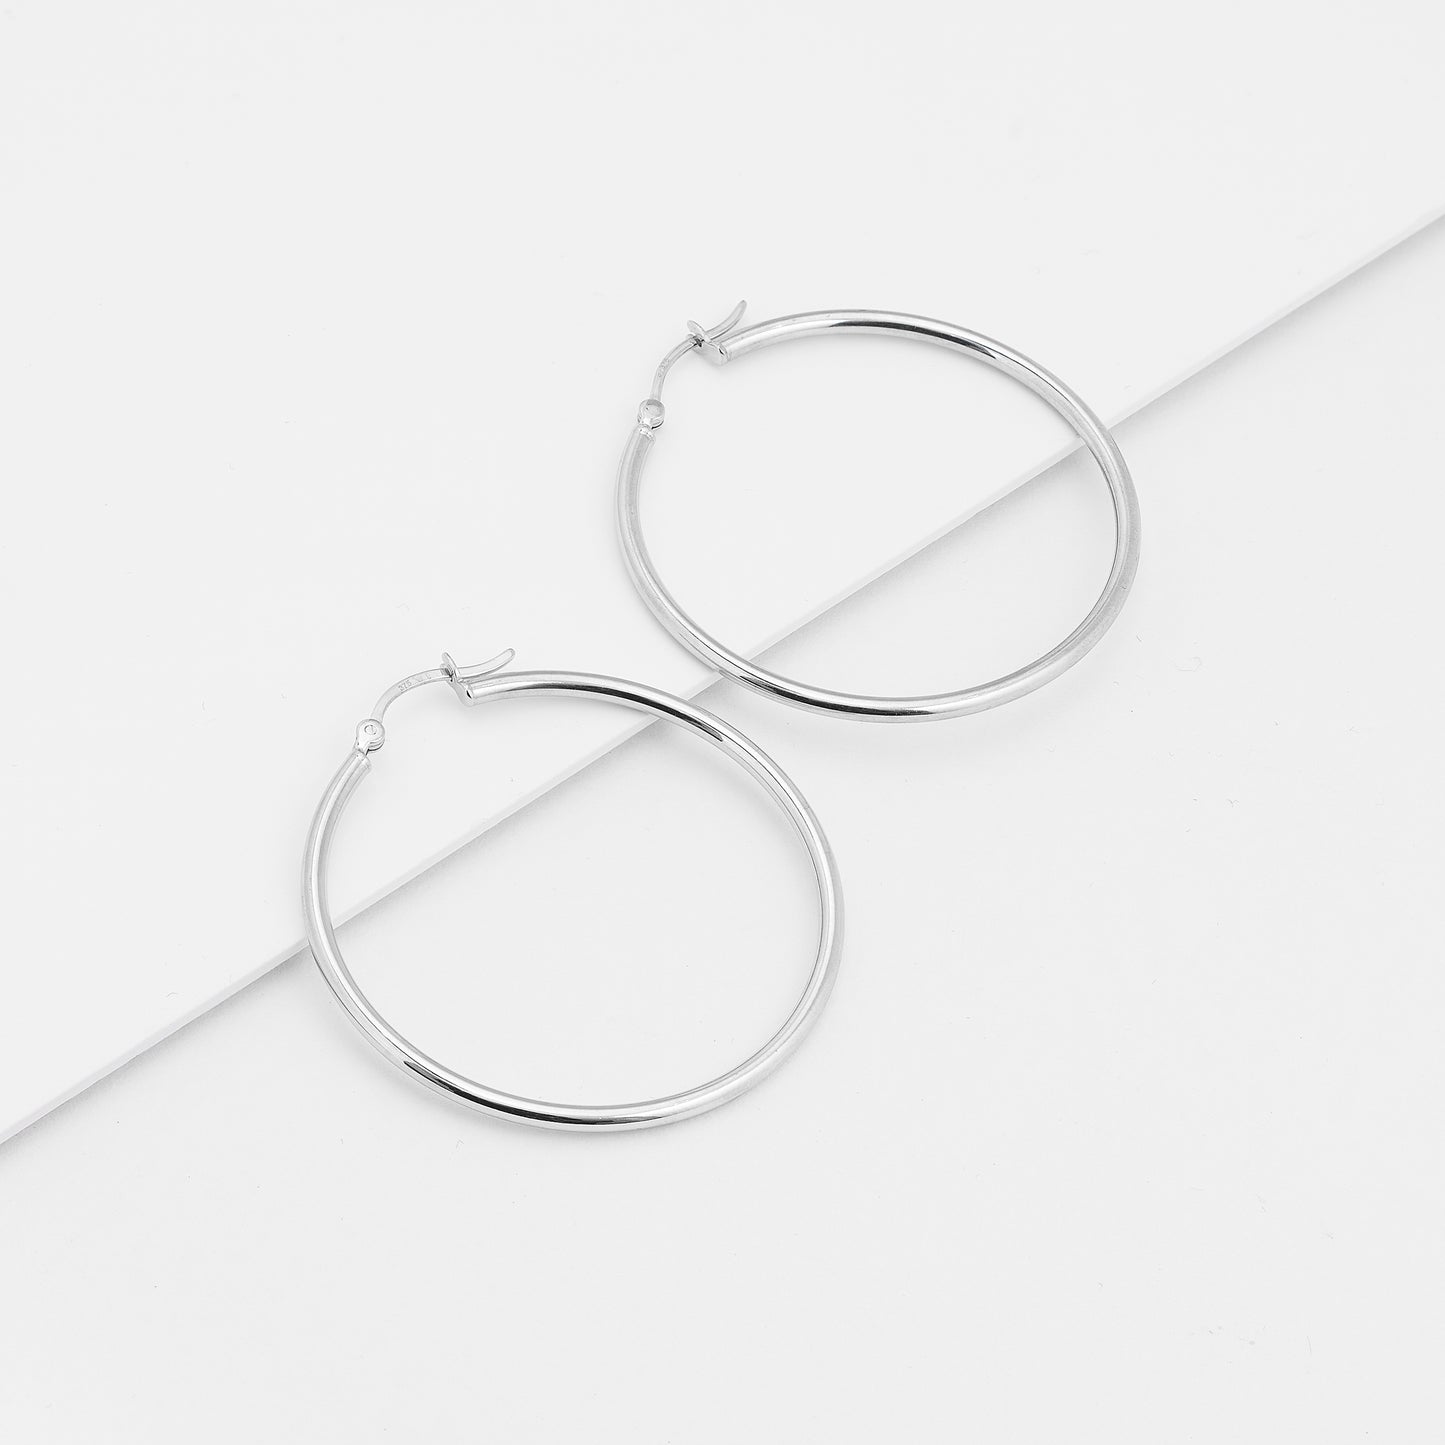 9K White Gold Polished Round Hoop Earrings 35mm